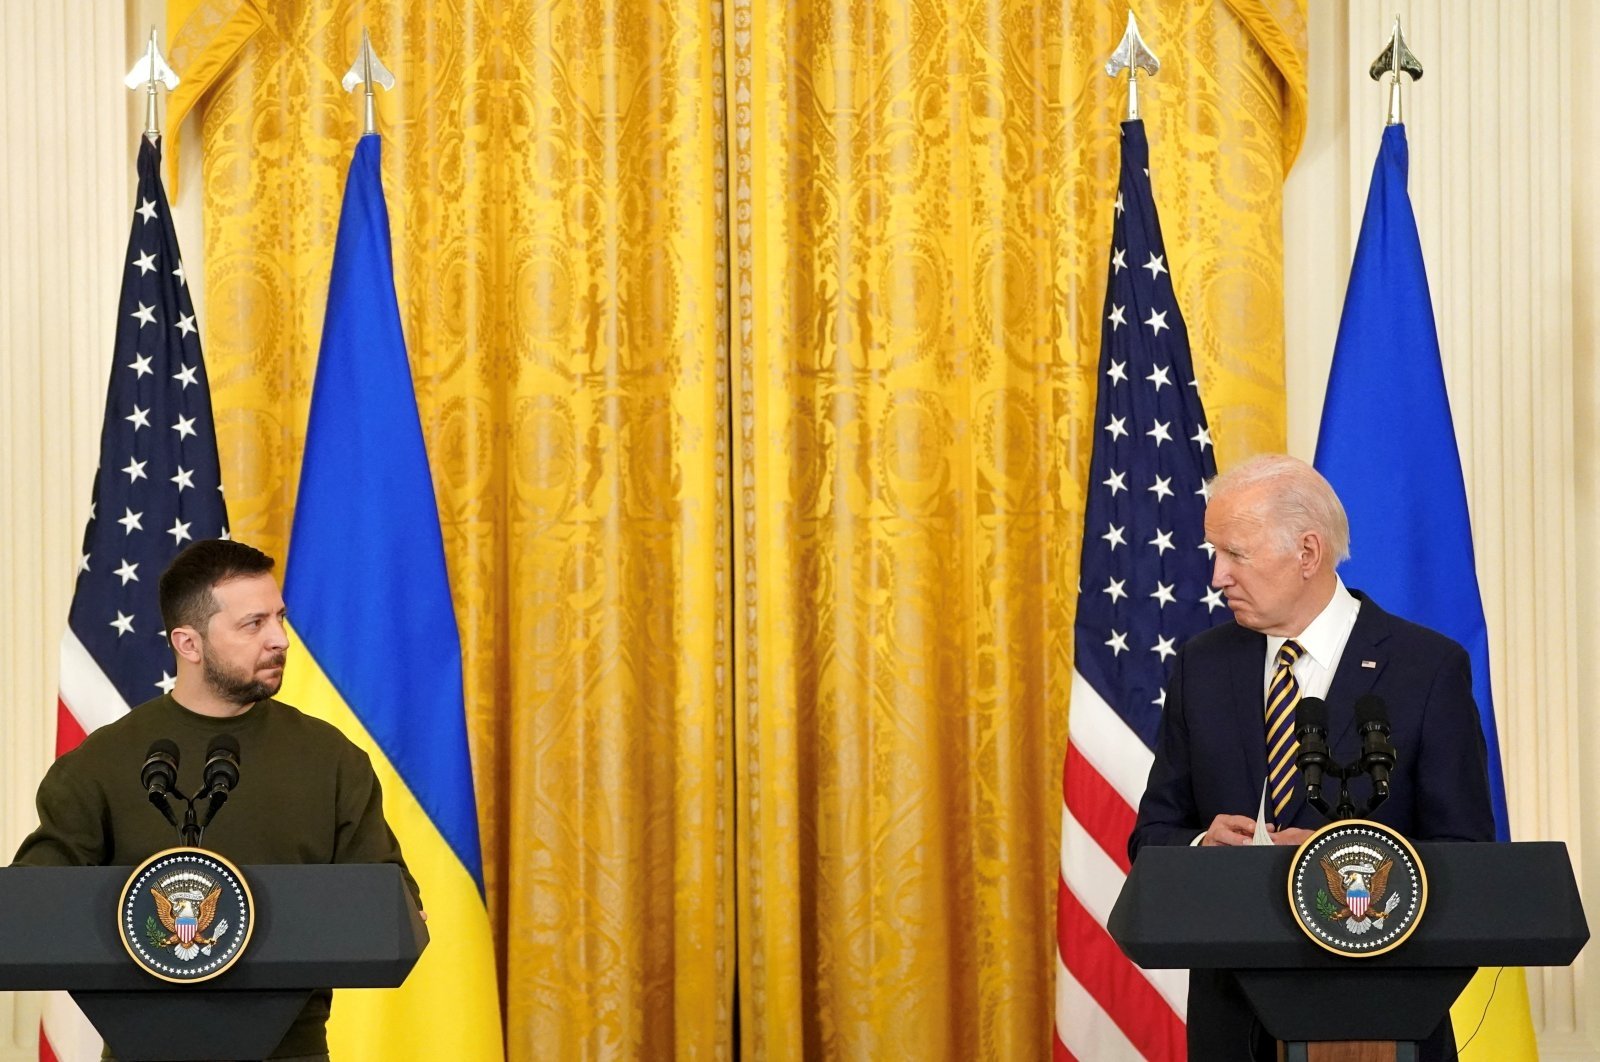 U.S. President Joe Biden and Ukraine&#039;s President Volodymyr Zelenskyy hold a joint news conference in the East Room of the White House in Washington, U.S., Dec. 21, 2022. (Reuters File Photo)